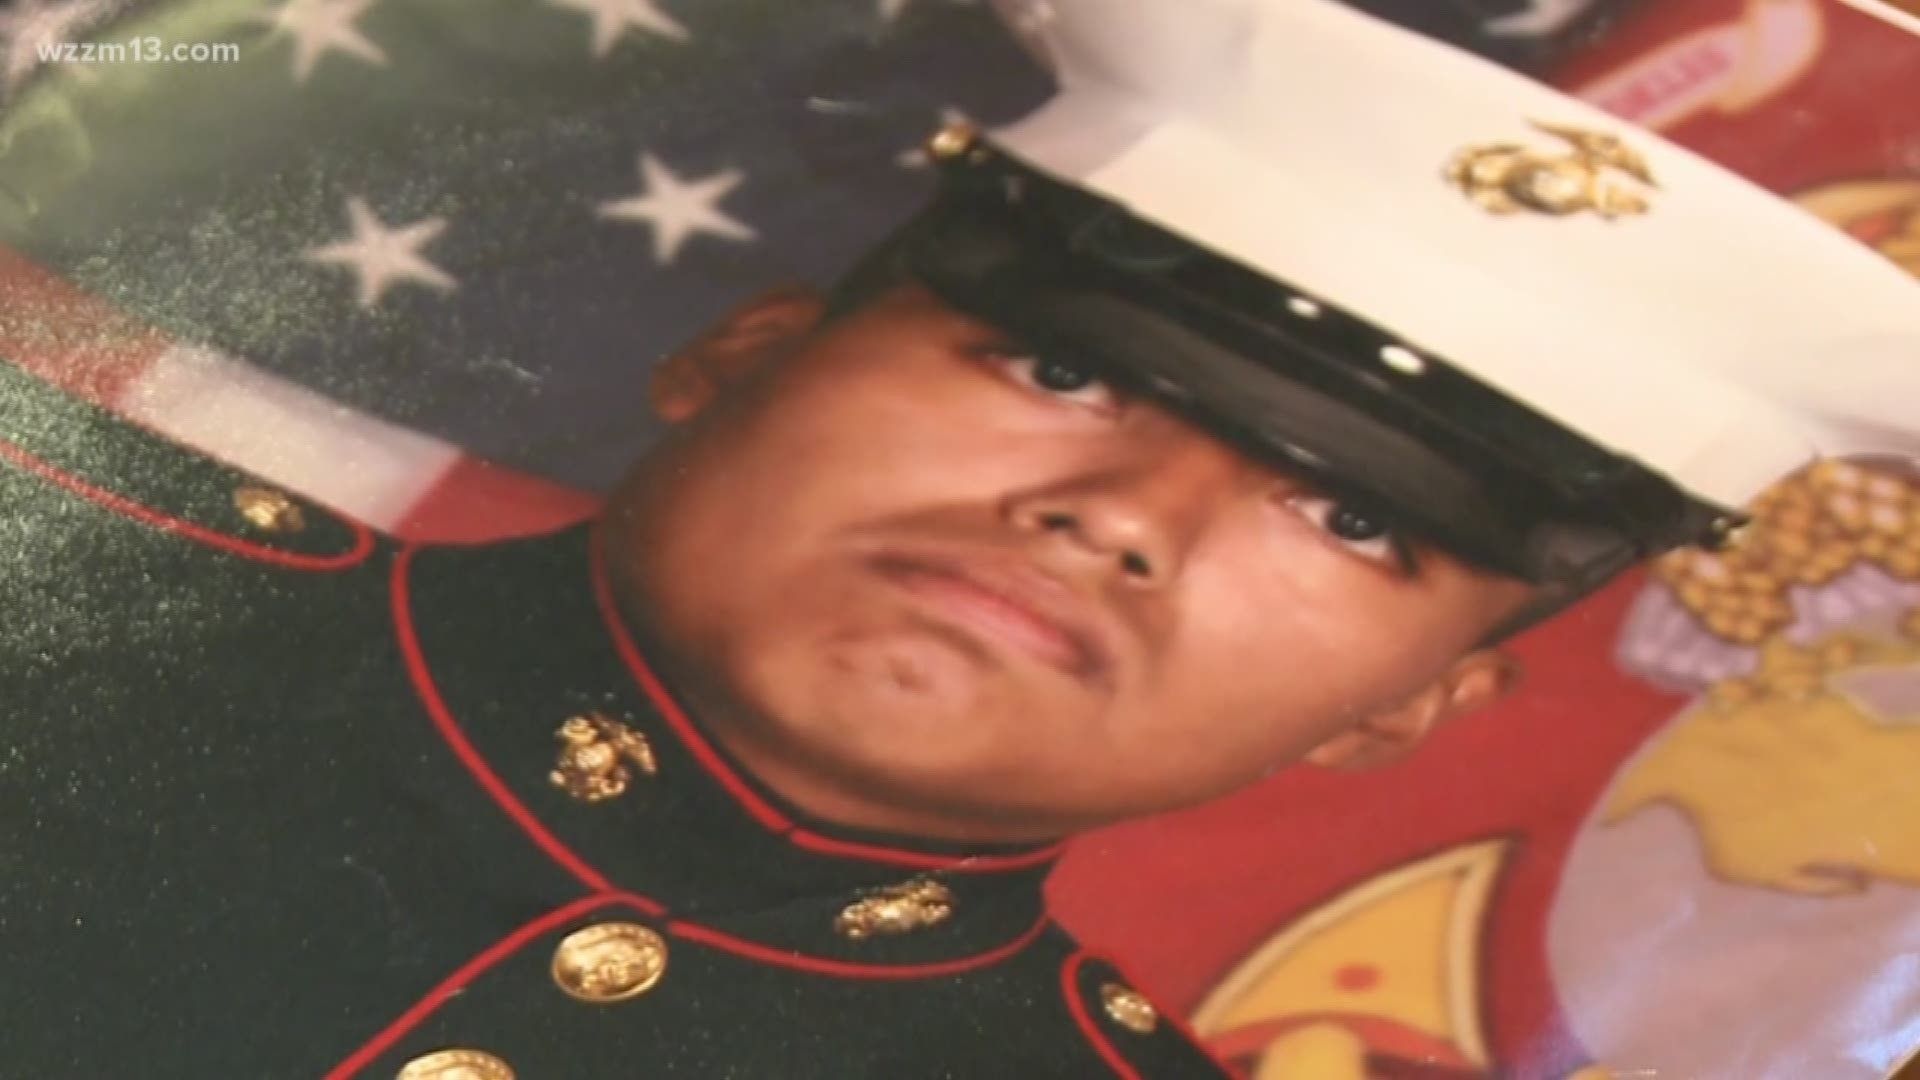 The change in policy comes after deputies handed a Grand Rapids born, marine combat veteran over to ice agents last month.